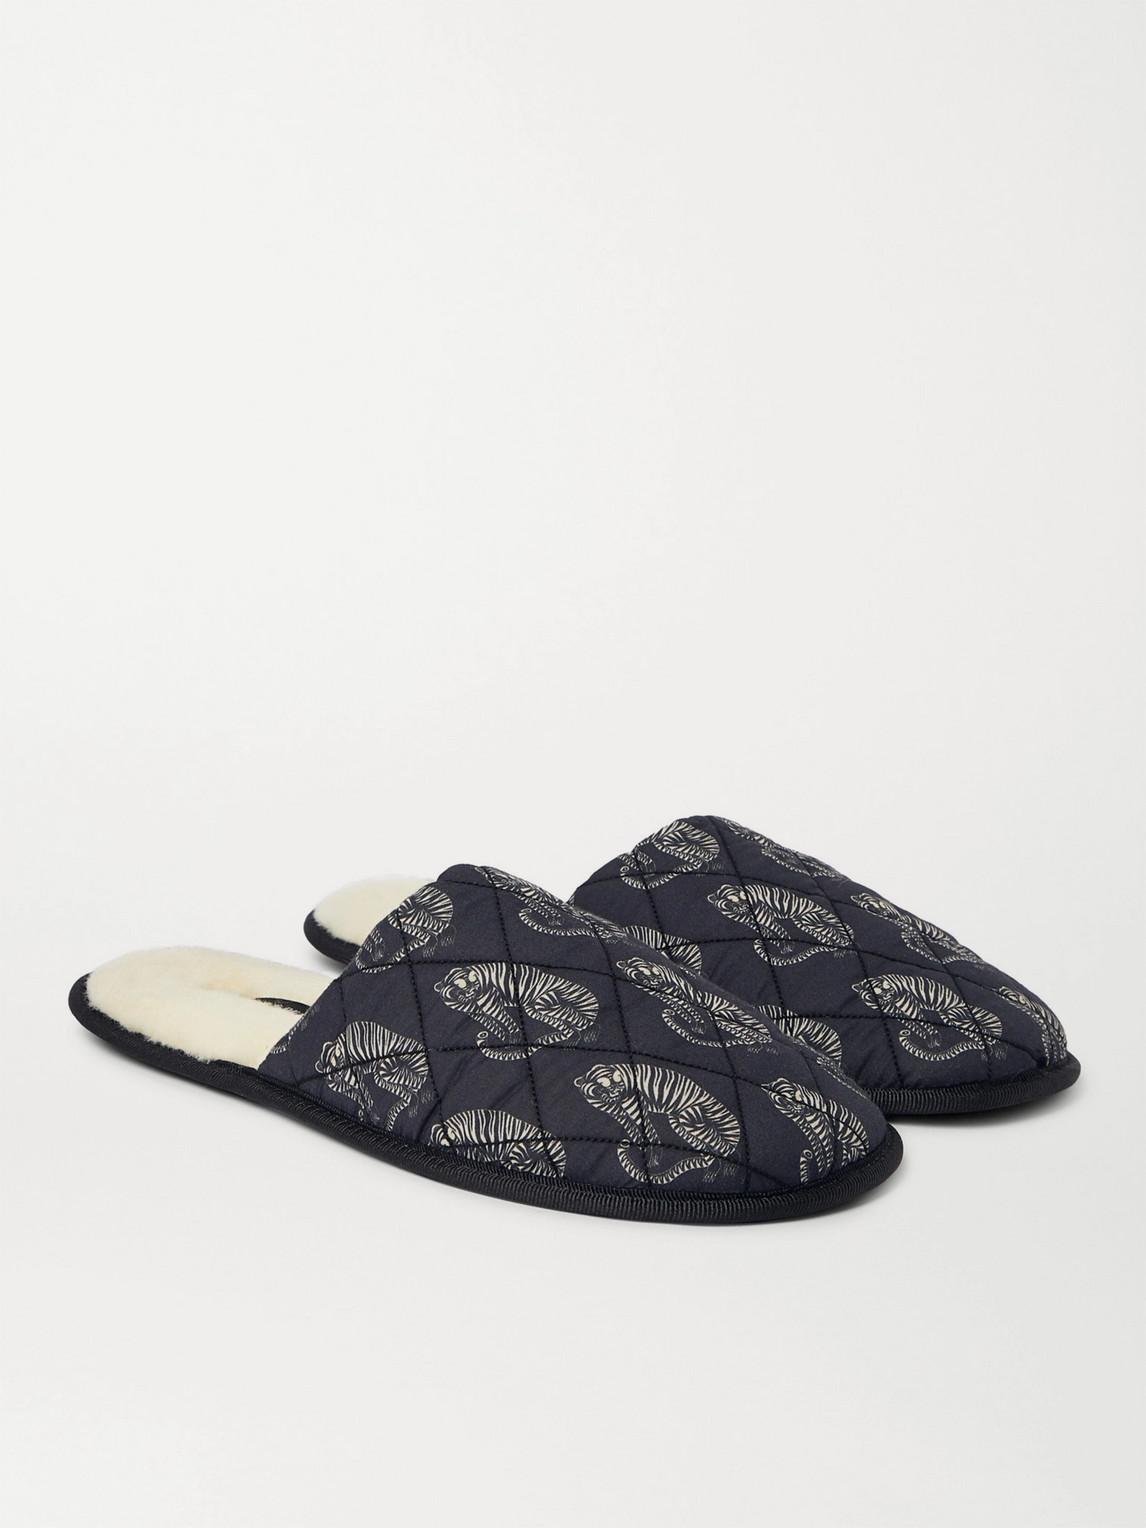 DESMOND & DEMPSEY PRINTED QUILTED COTTON SLIPPERS